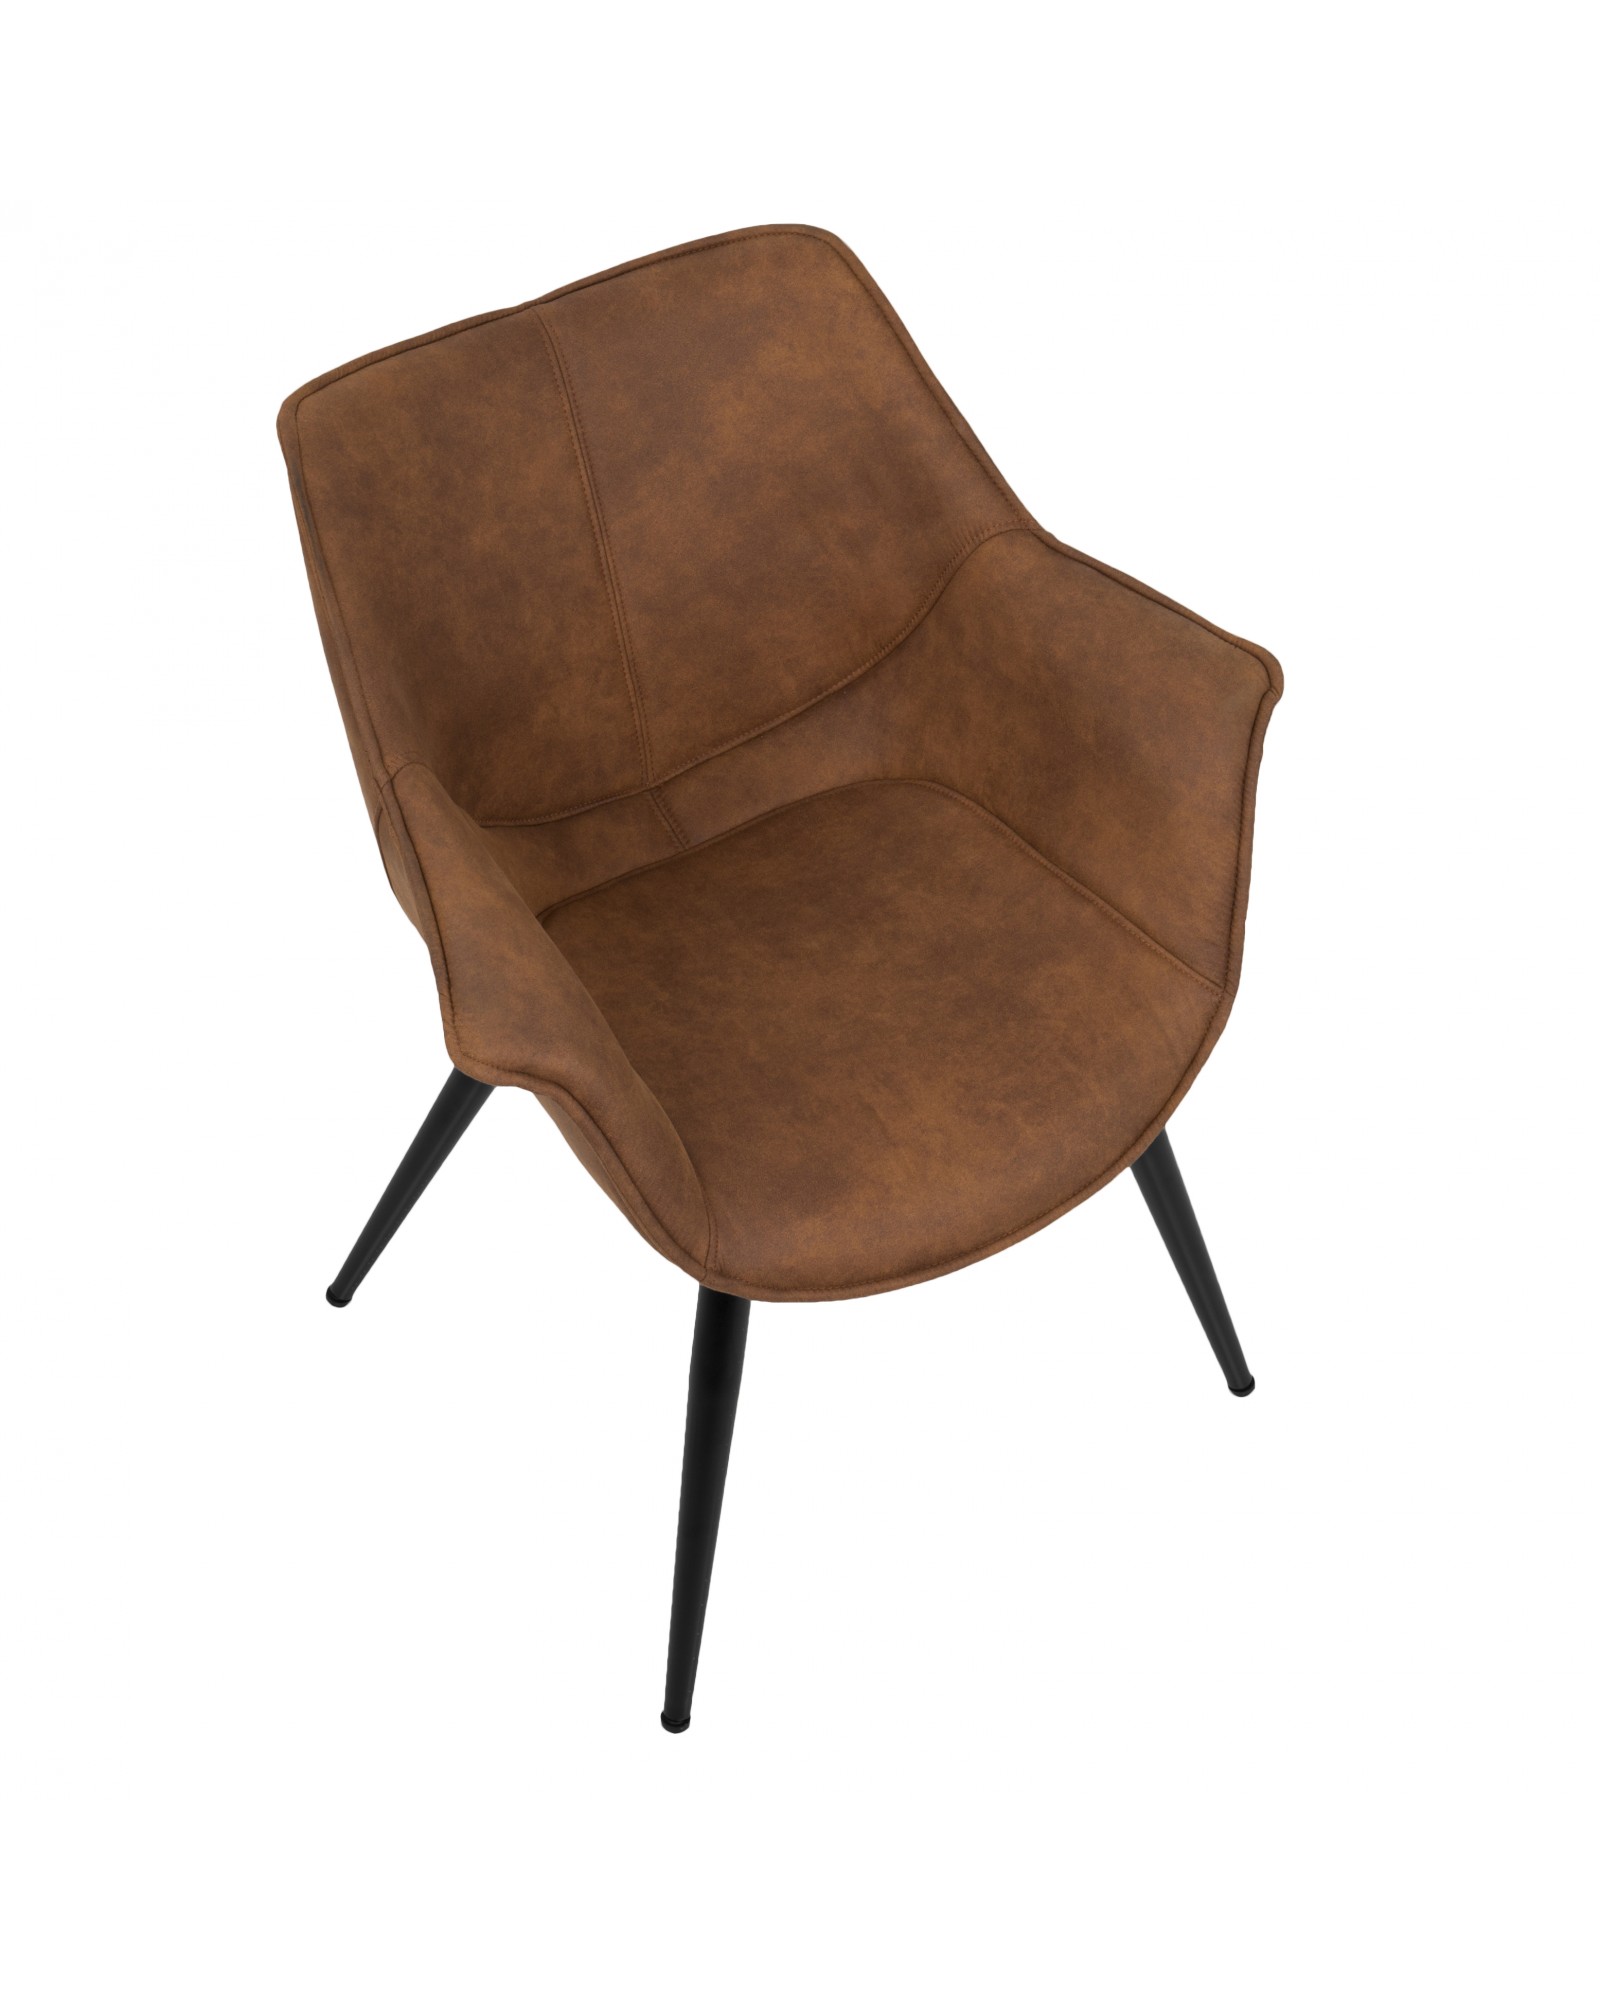 Wrangler Contemporary Accent Chair in Rust - Set of 2